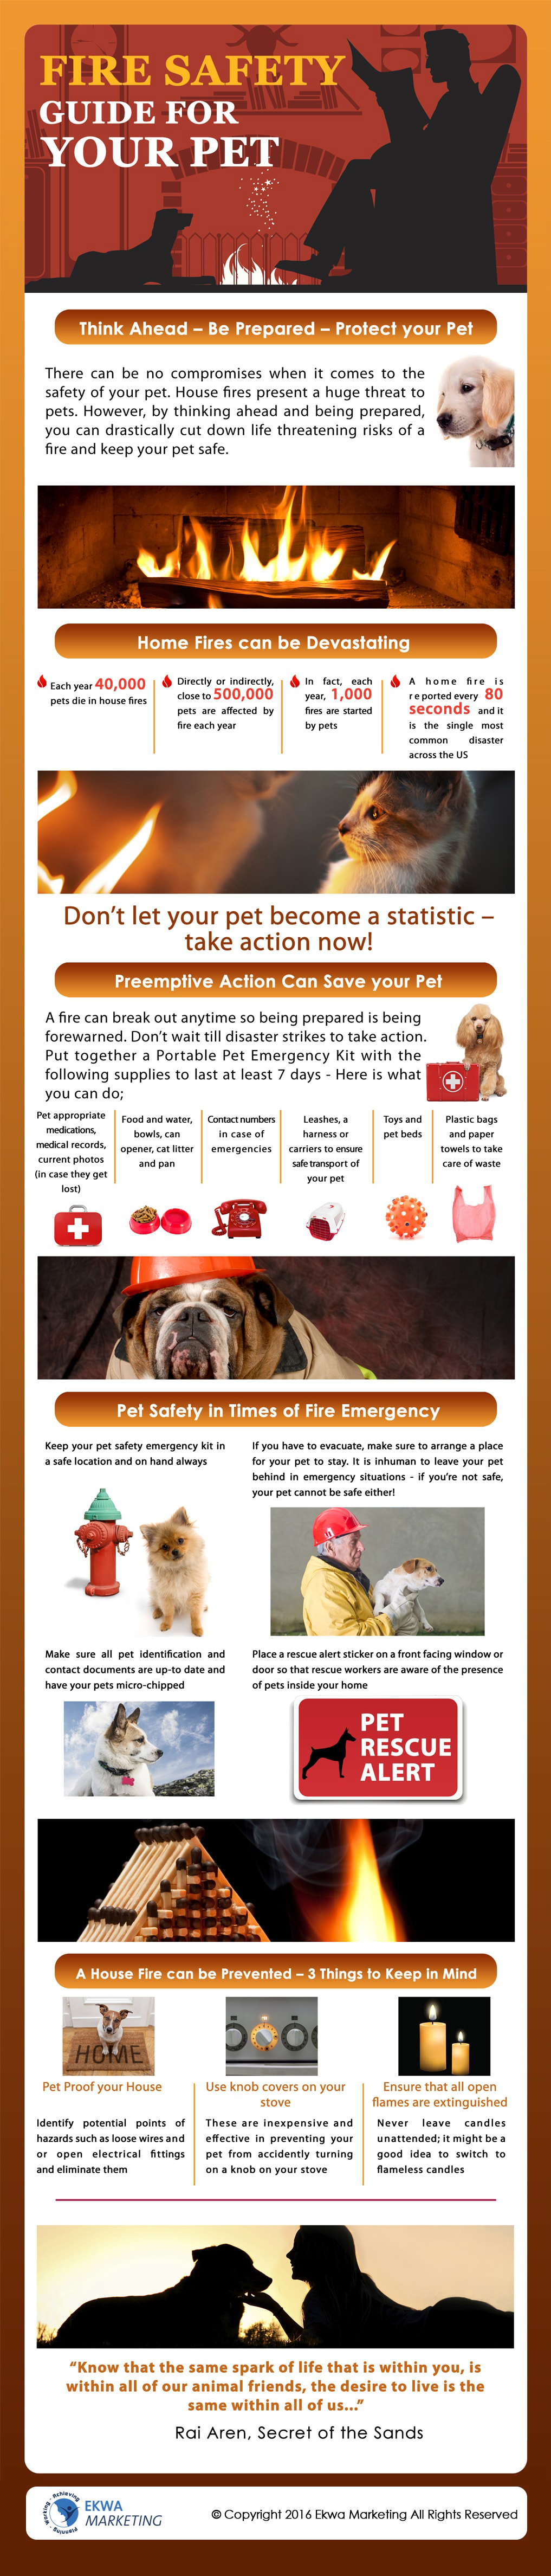 Veterinary Info Graphics, Fire safety guide for your pet